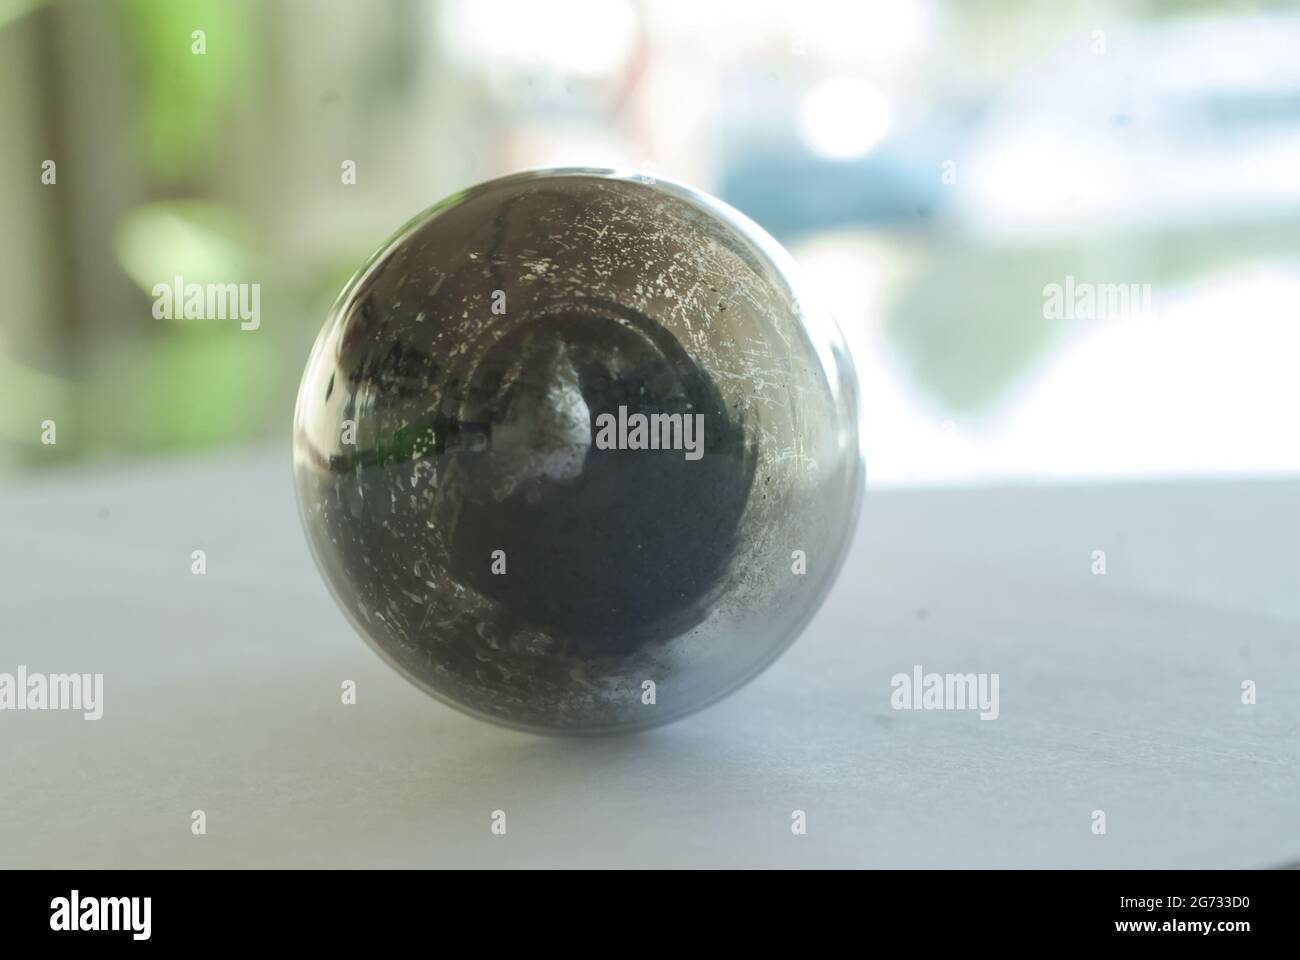 planet shape macro dirty bulb closeup,round glass ball with dust and scratches inside Stock Photo